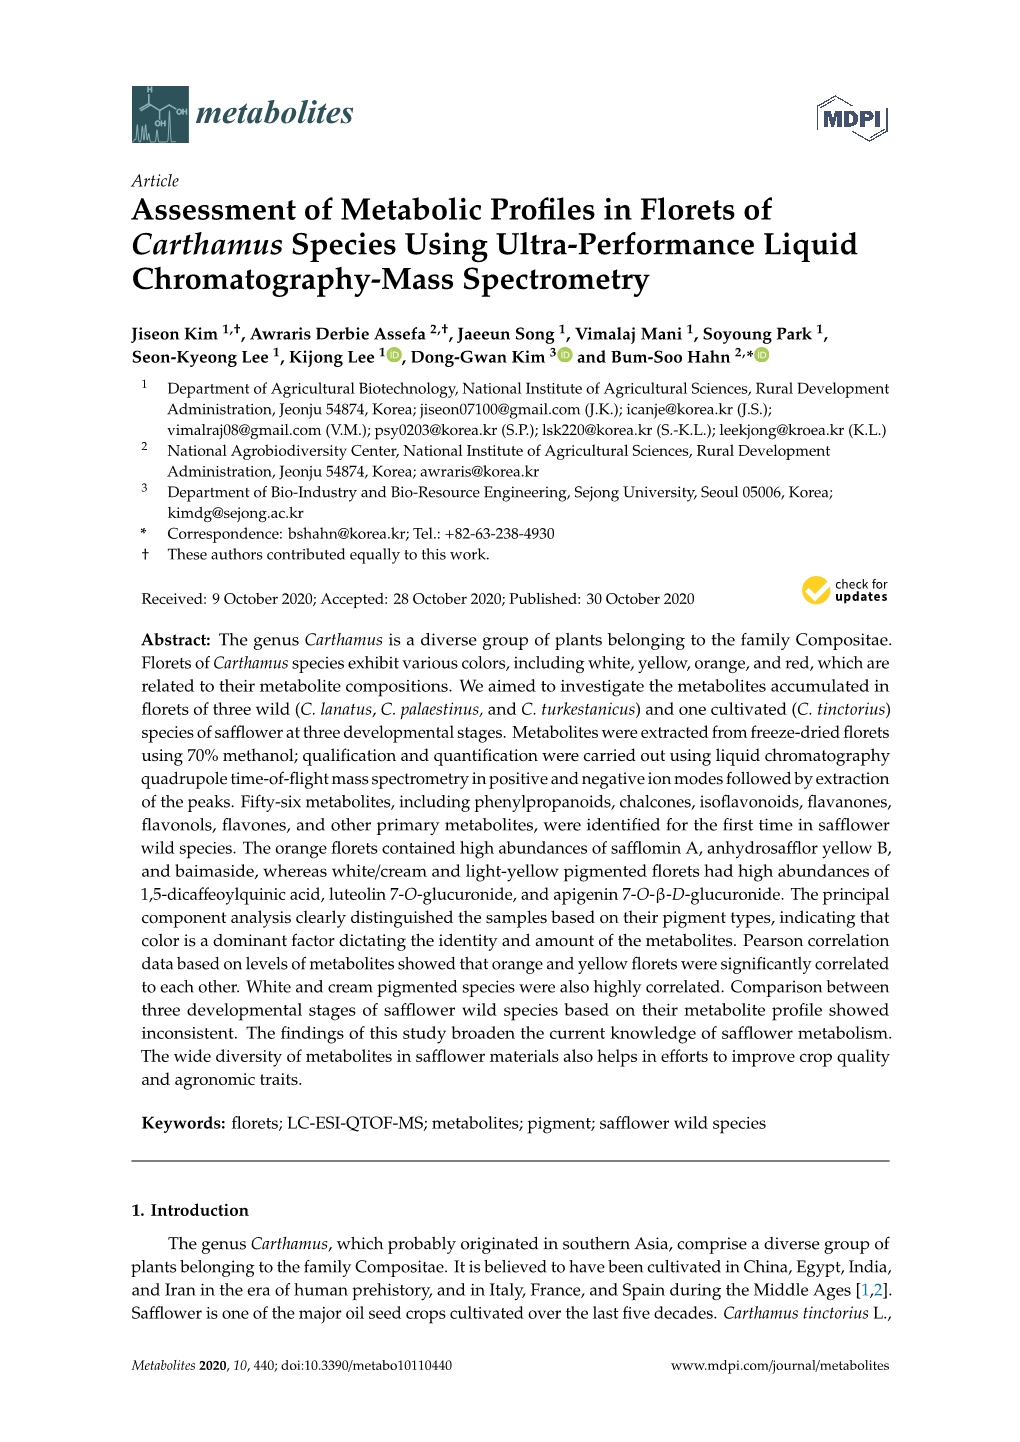 Assessment of Metabolic Profiles in Florets of Carthamus Species Using Ultra-Performance Liquid Chromatography-Mass Spectrometry